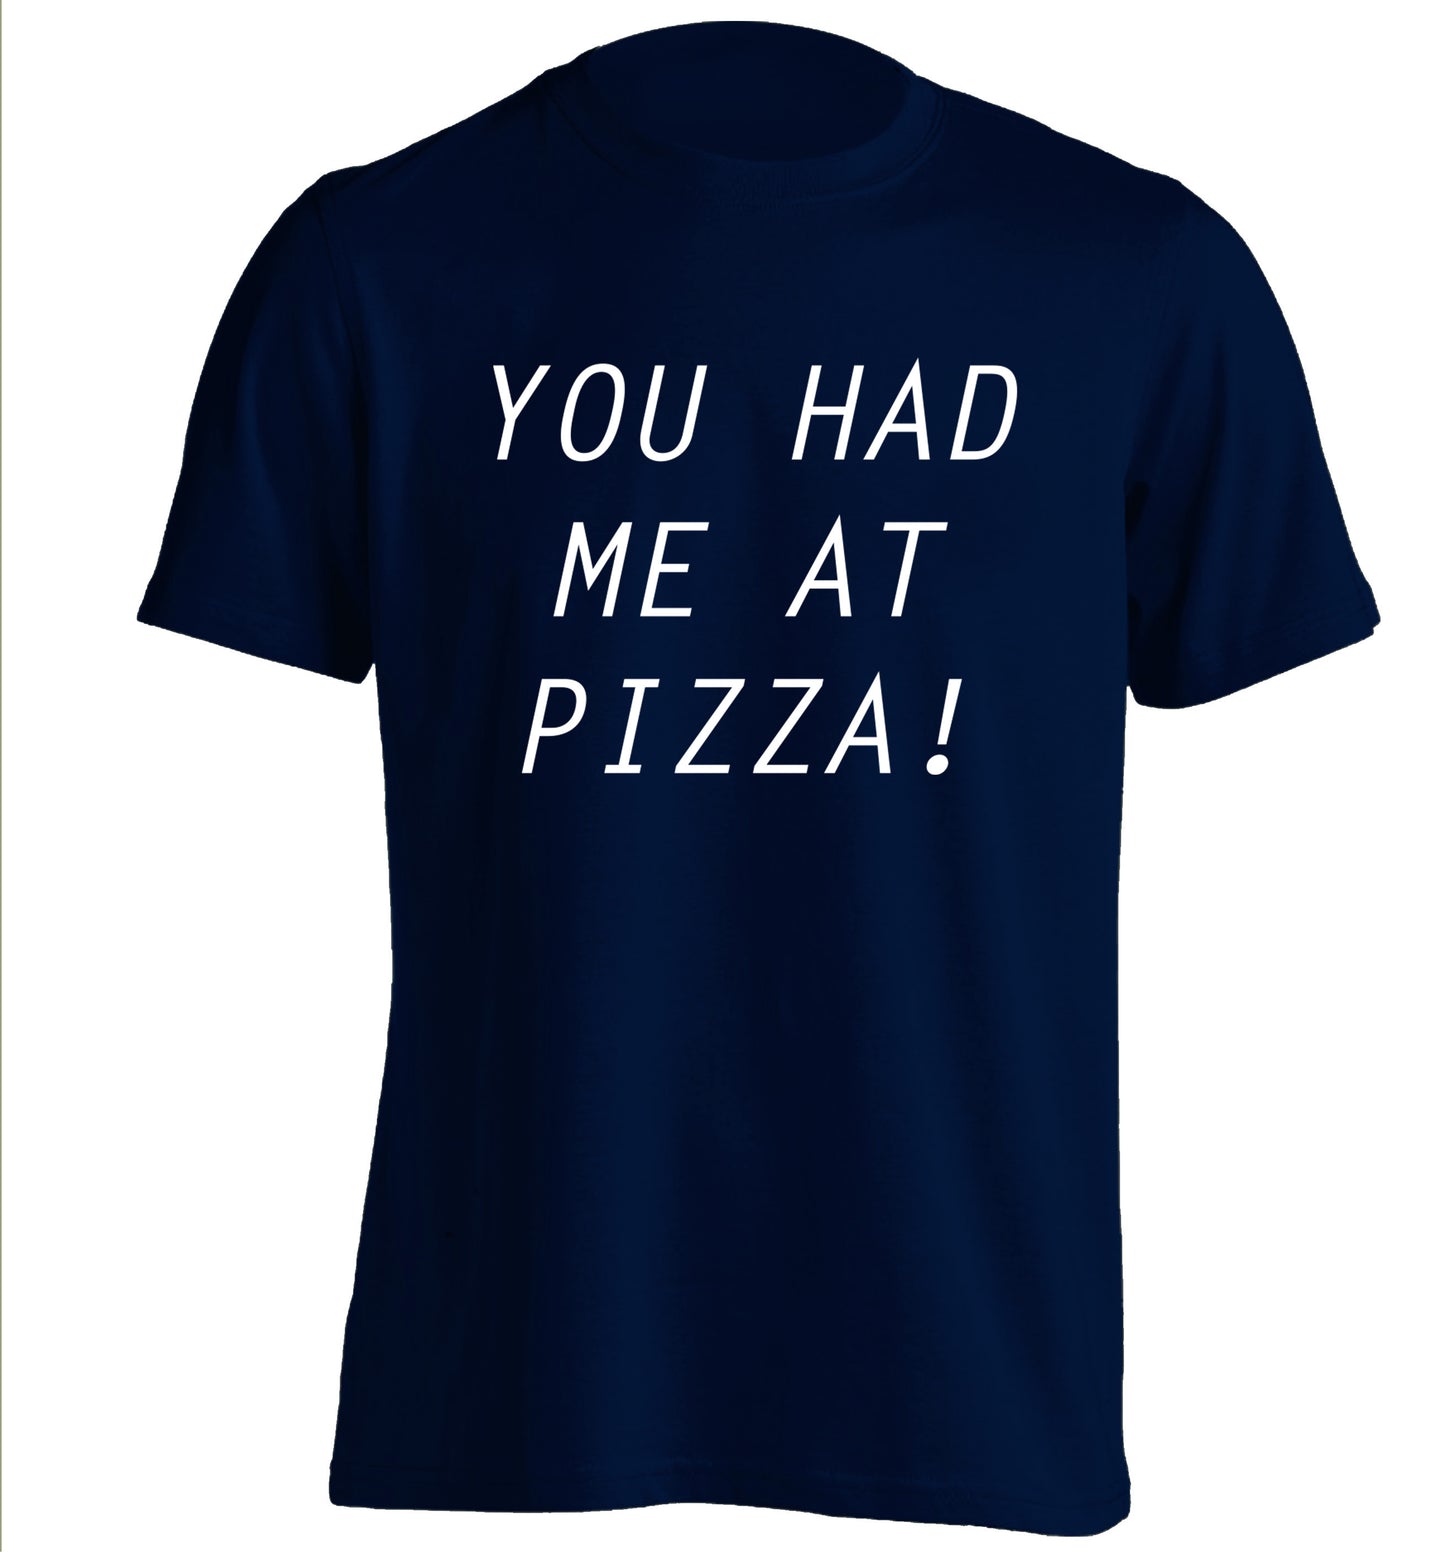 You had me at pizza adults unisex navy Tshirt 2XL